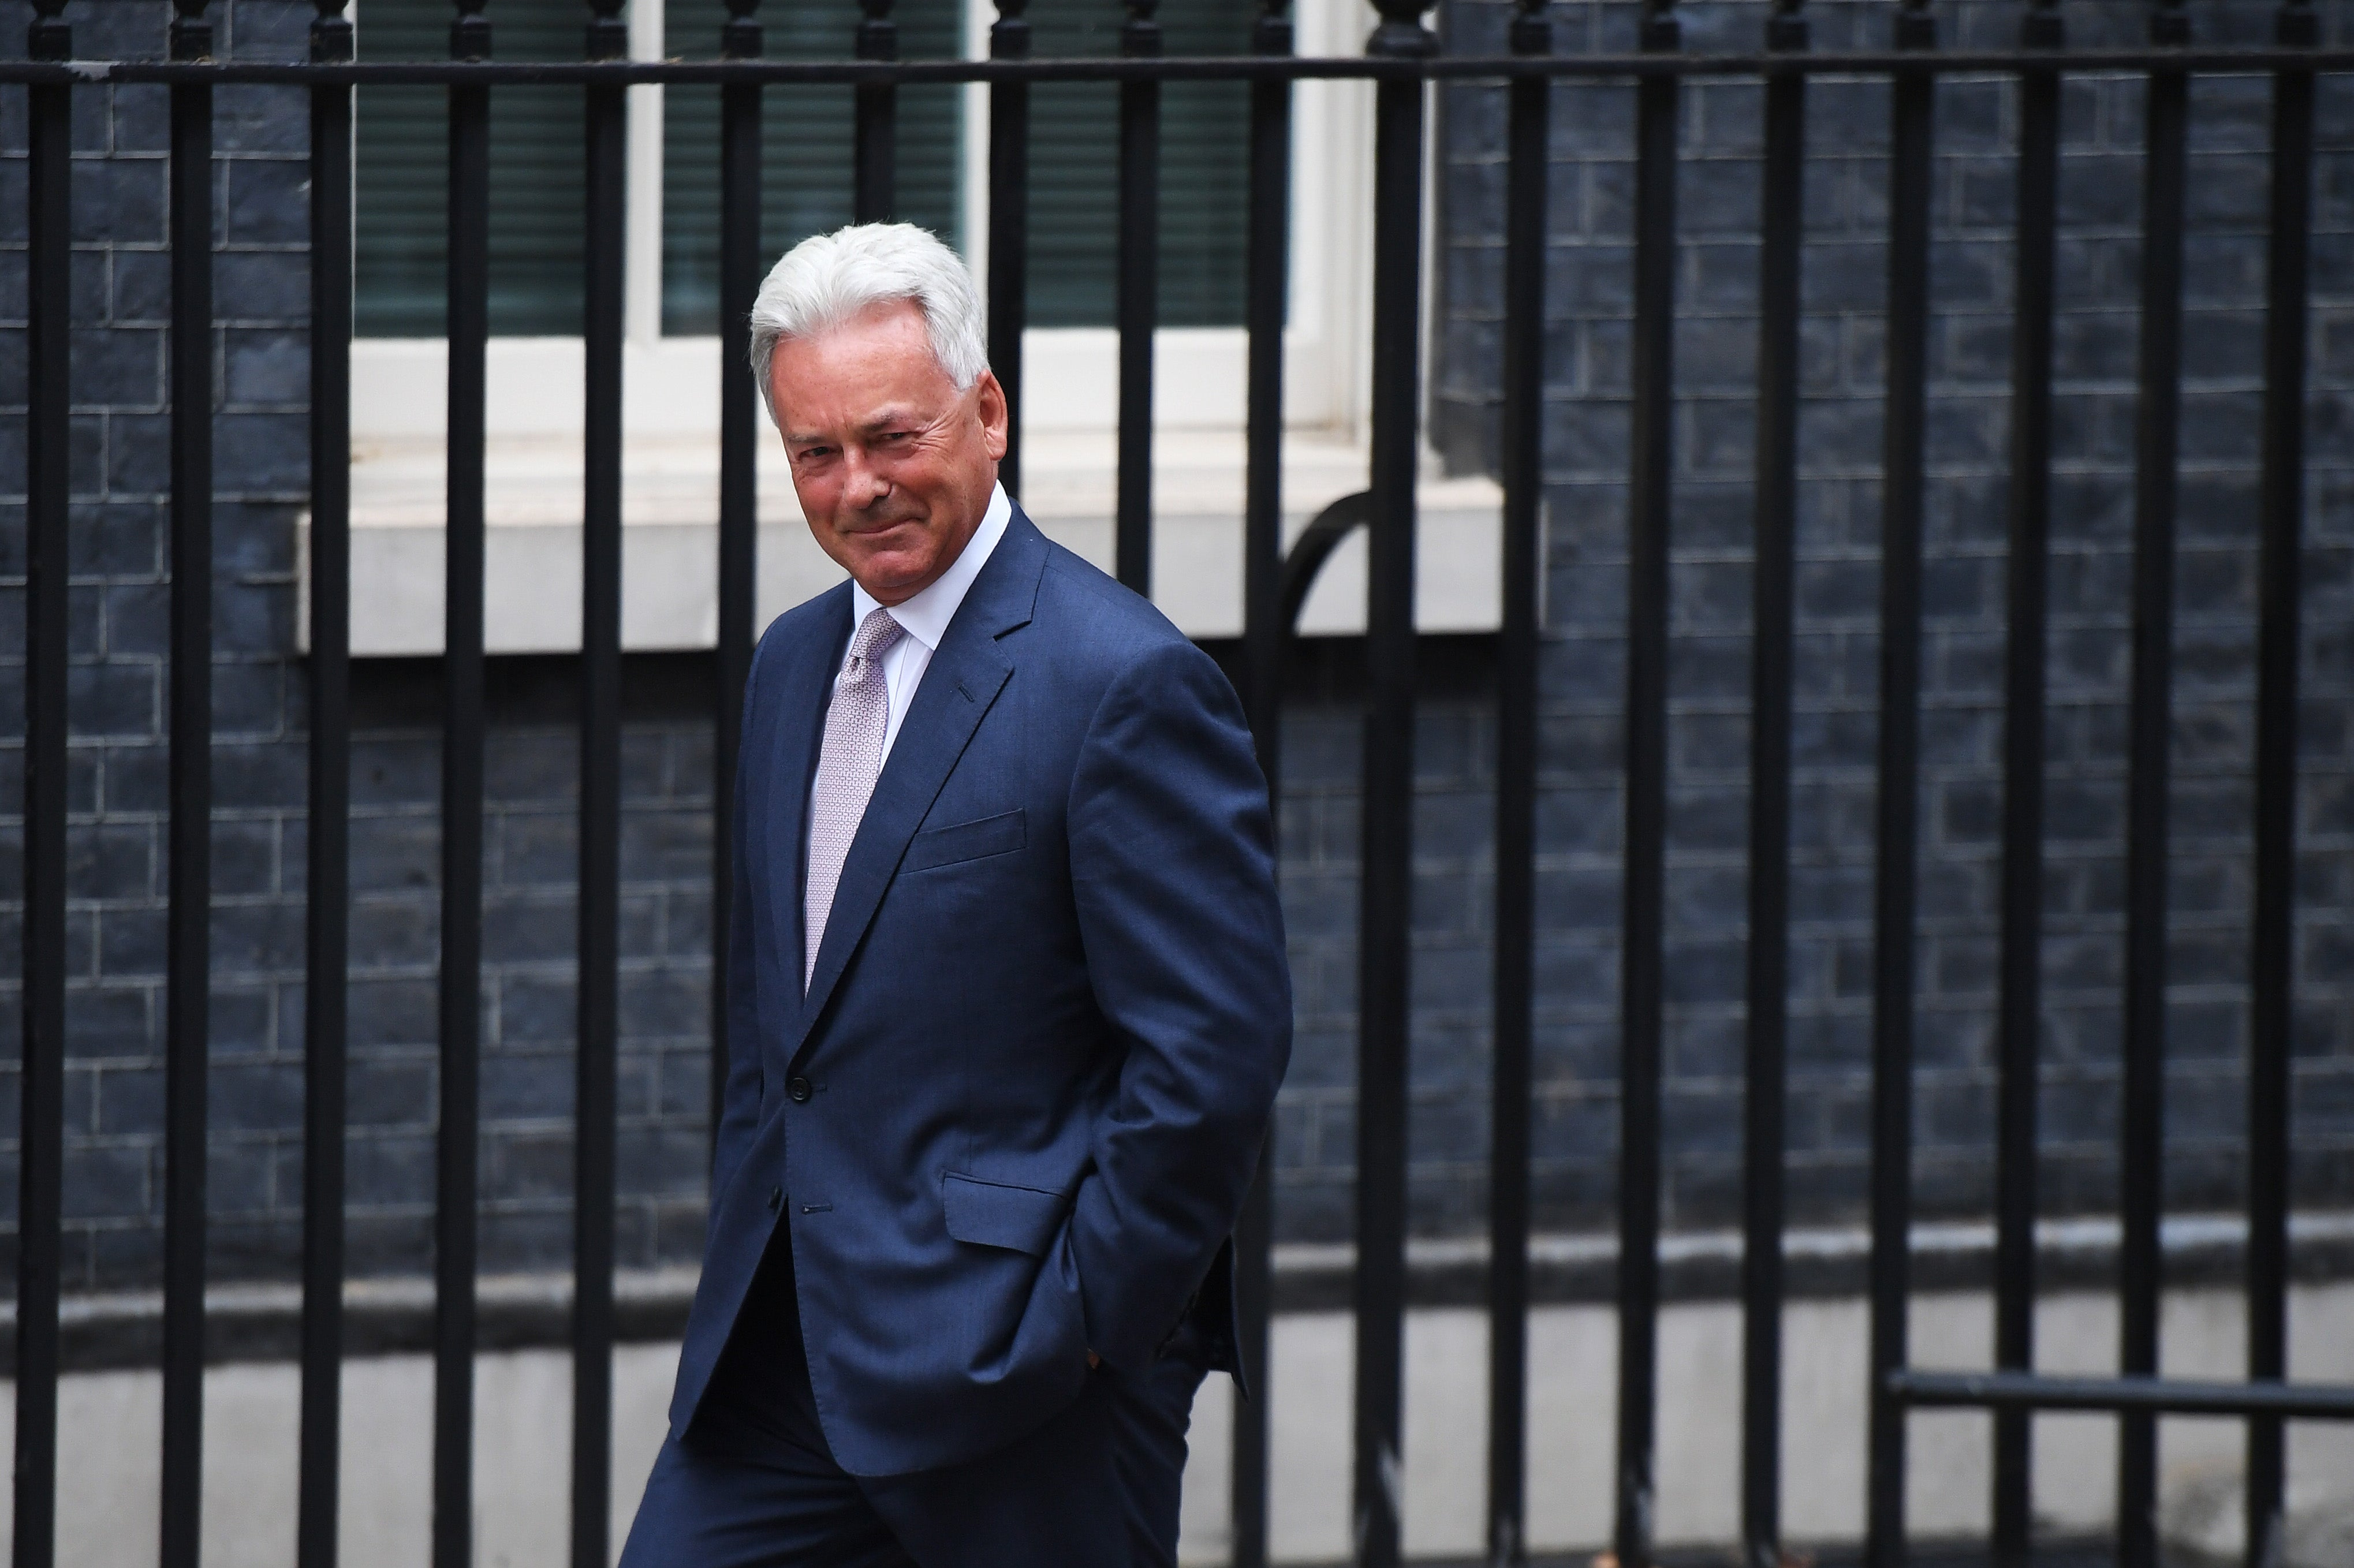 Sir Alan Duncan is under investigation by the Conservative Party